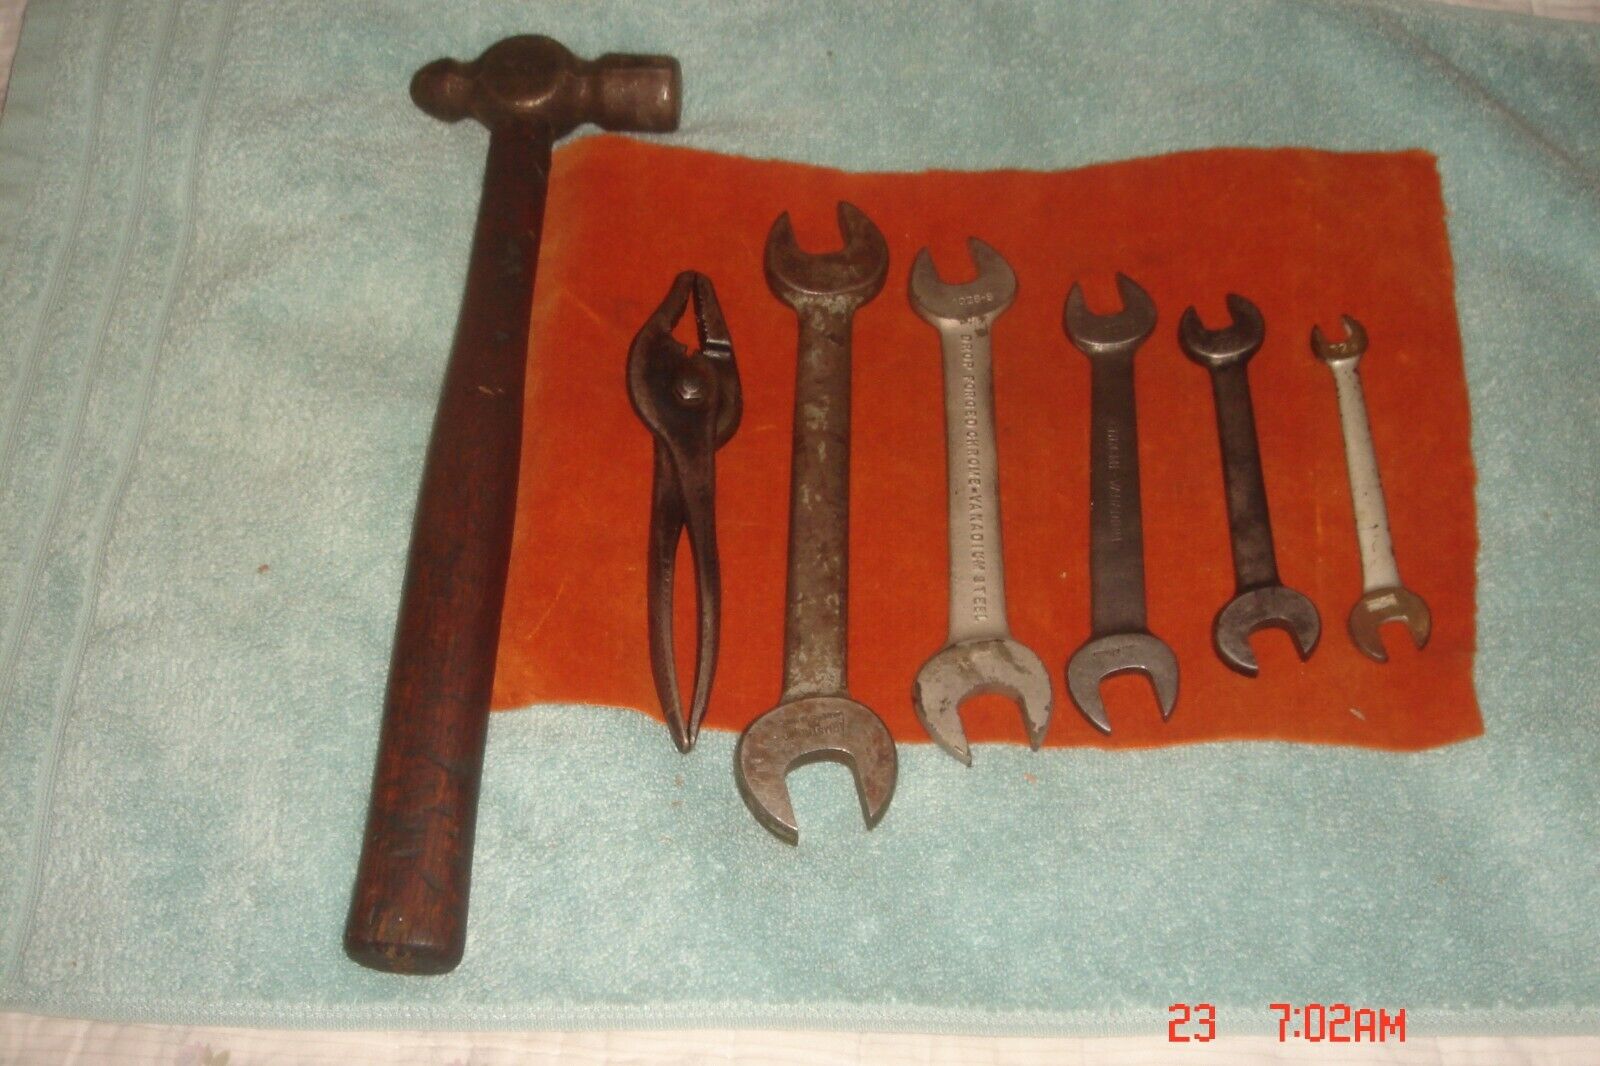 Ww2 Jeep, Willy's, Mb, Gpw, G503, Cckw, M151 Plier, Hammer & Armstrong Wrench's